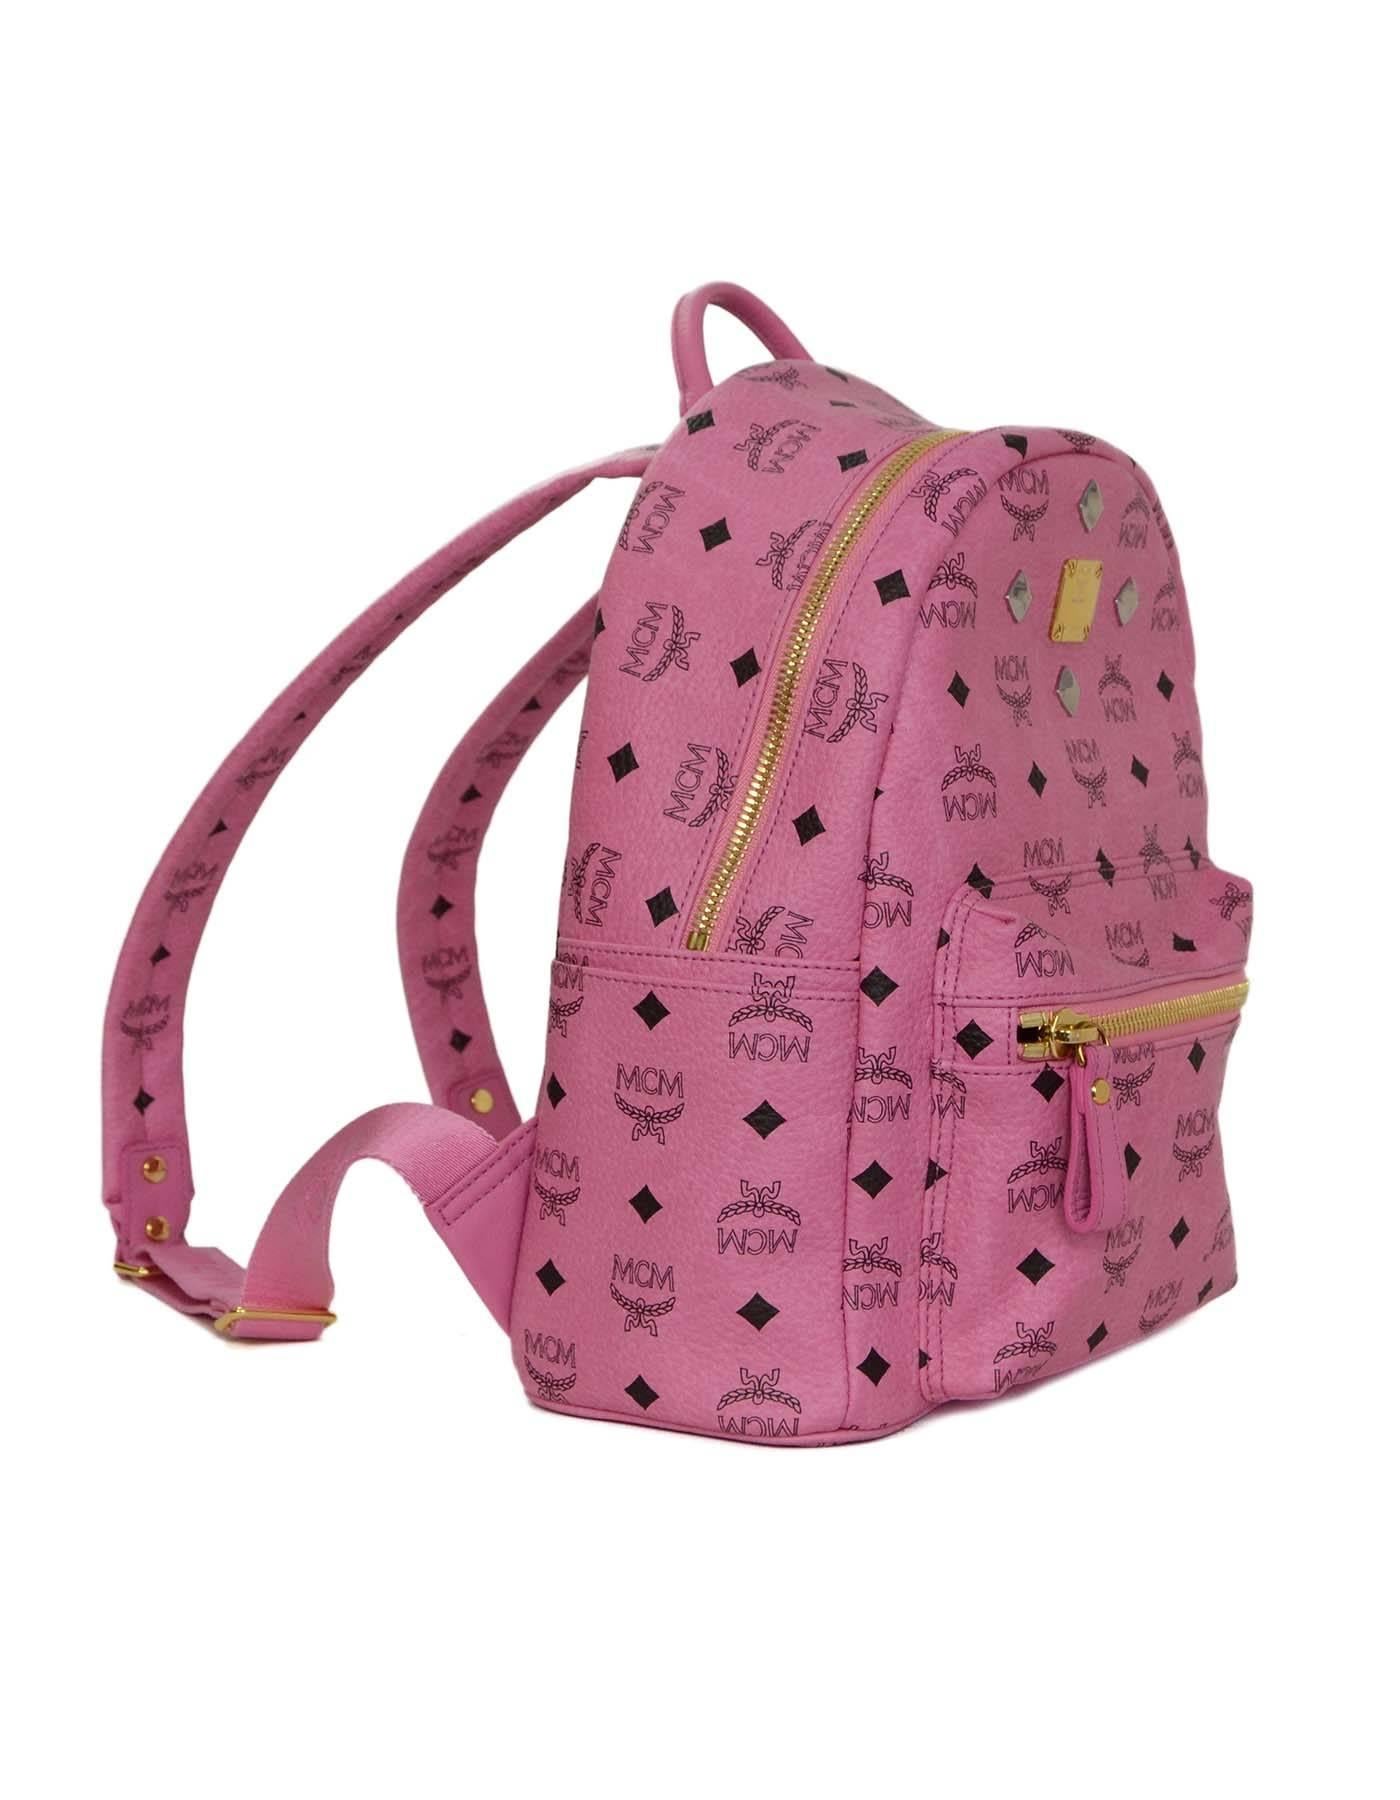 MCM Pink Leather Studded Backpack 
Features silvertone studs
Made In: Korea
Color: Pink and black
Hardware: Goldtone and silvertone
Materials: Leather
Closur/Opening: Double zip around closure
Exterior Pockets: One front zipper pocket and two